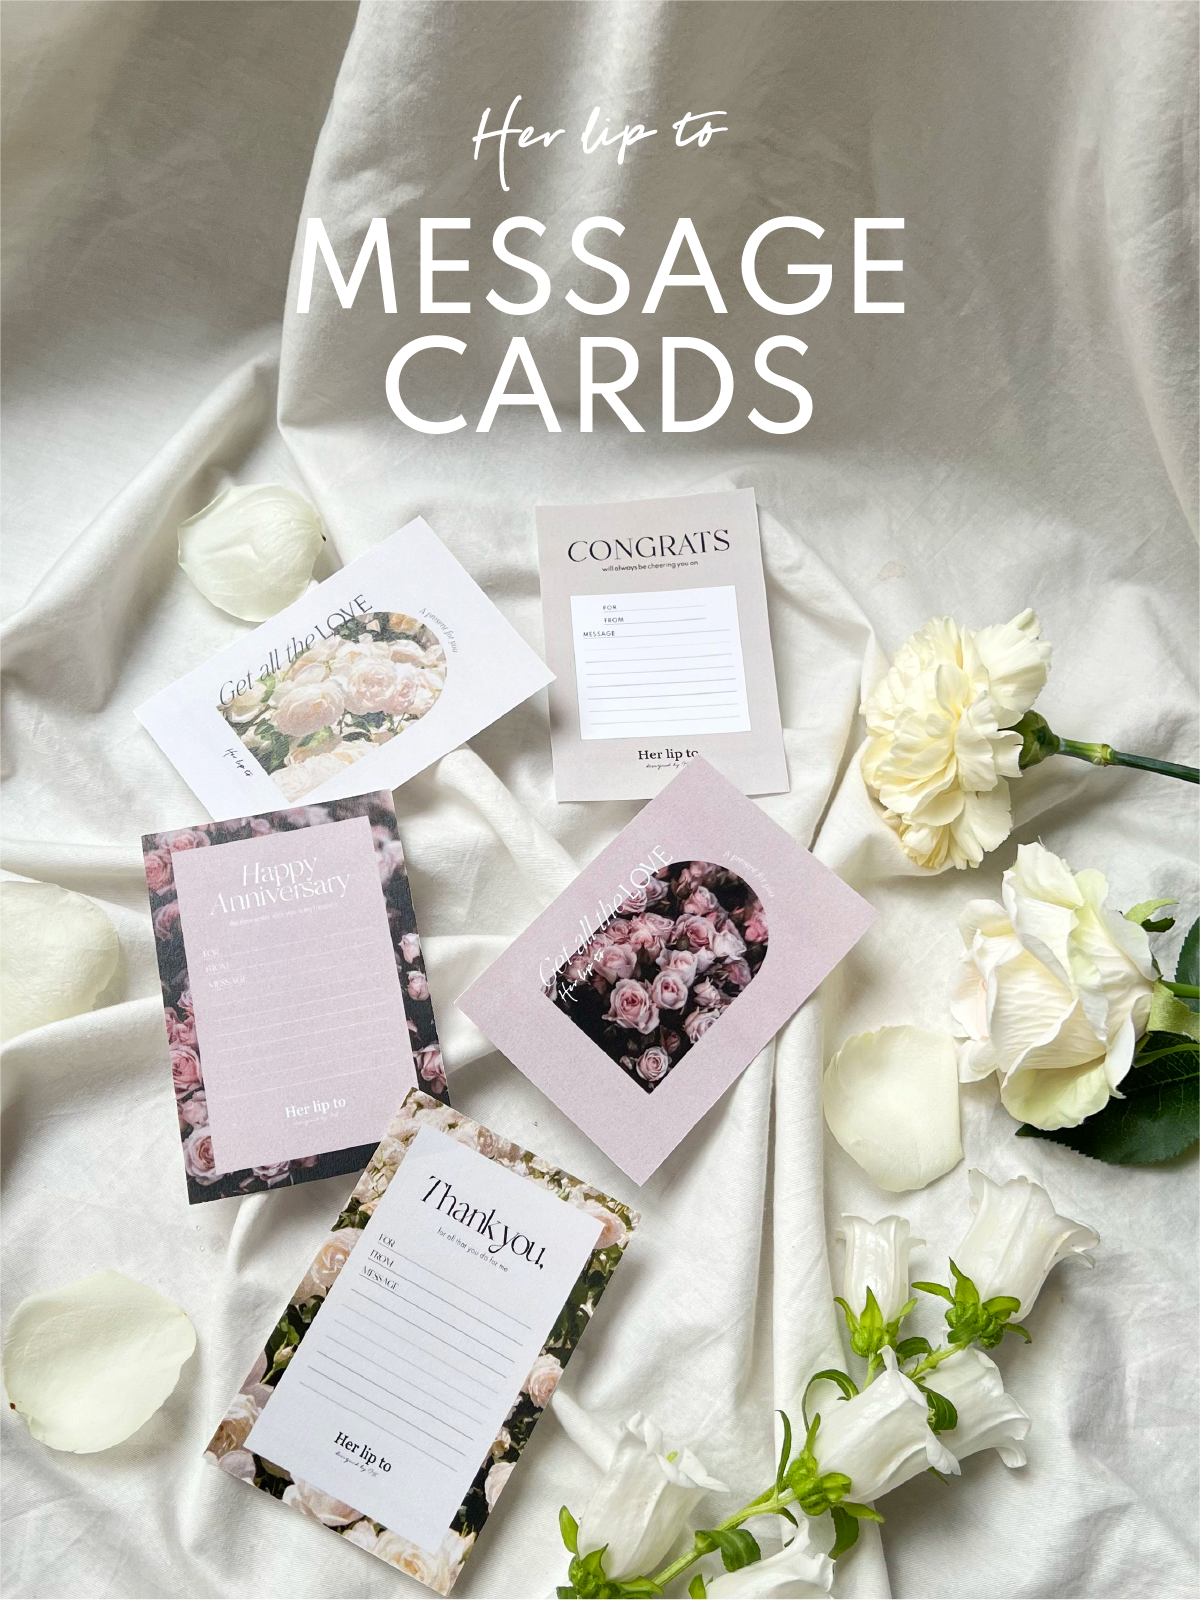 MESSAGE CARDS